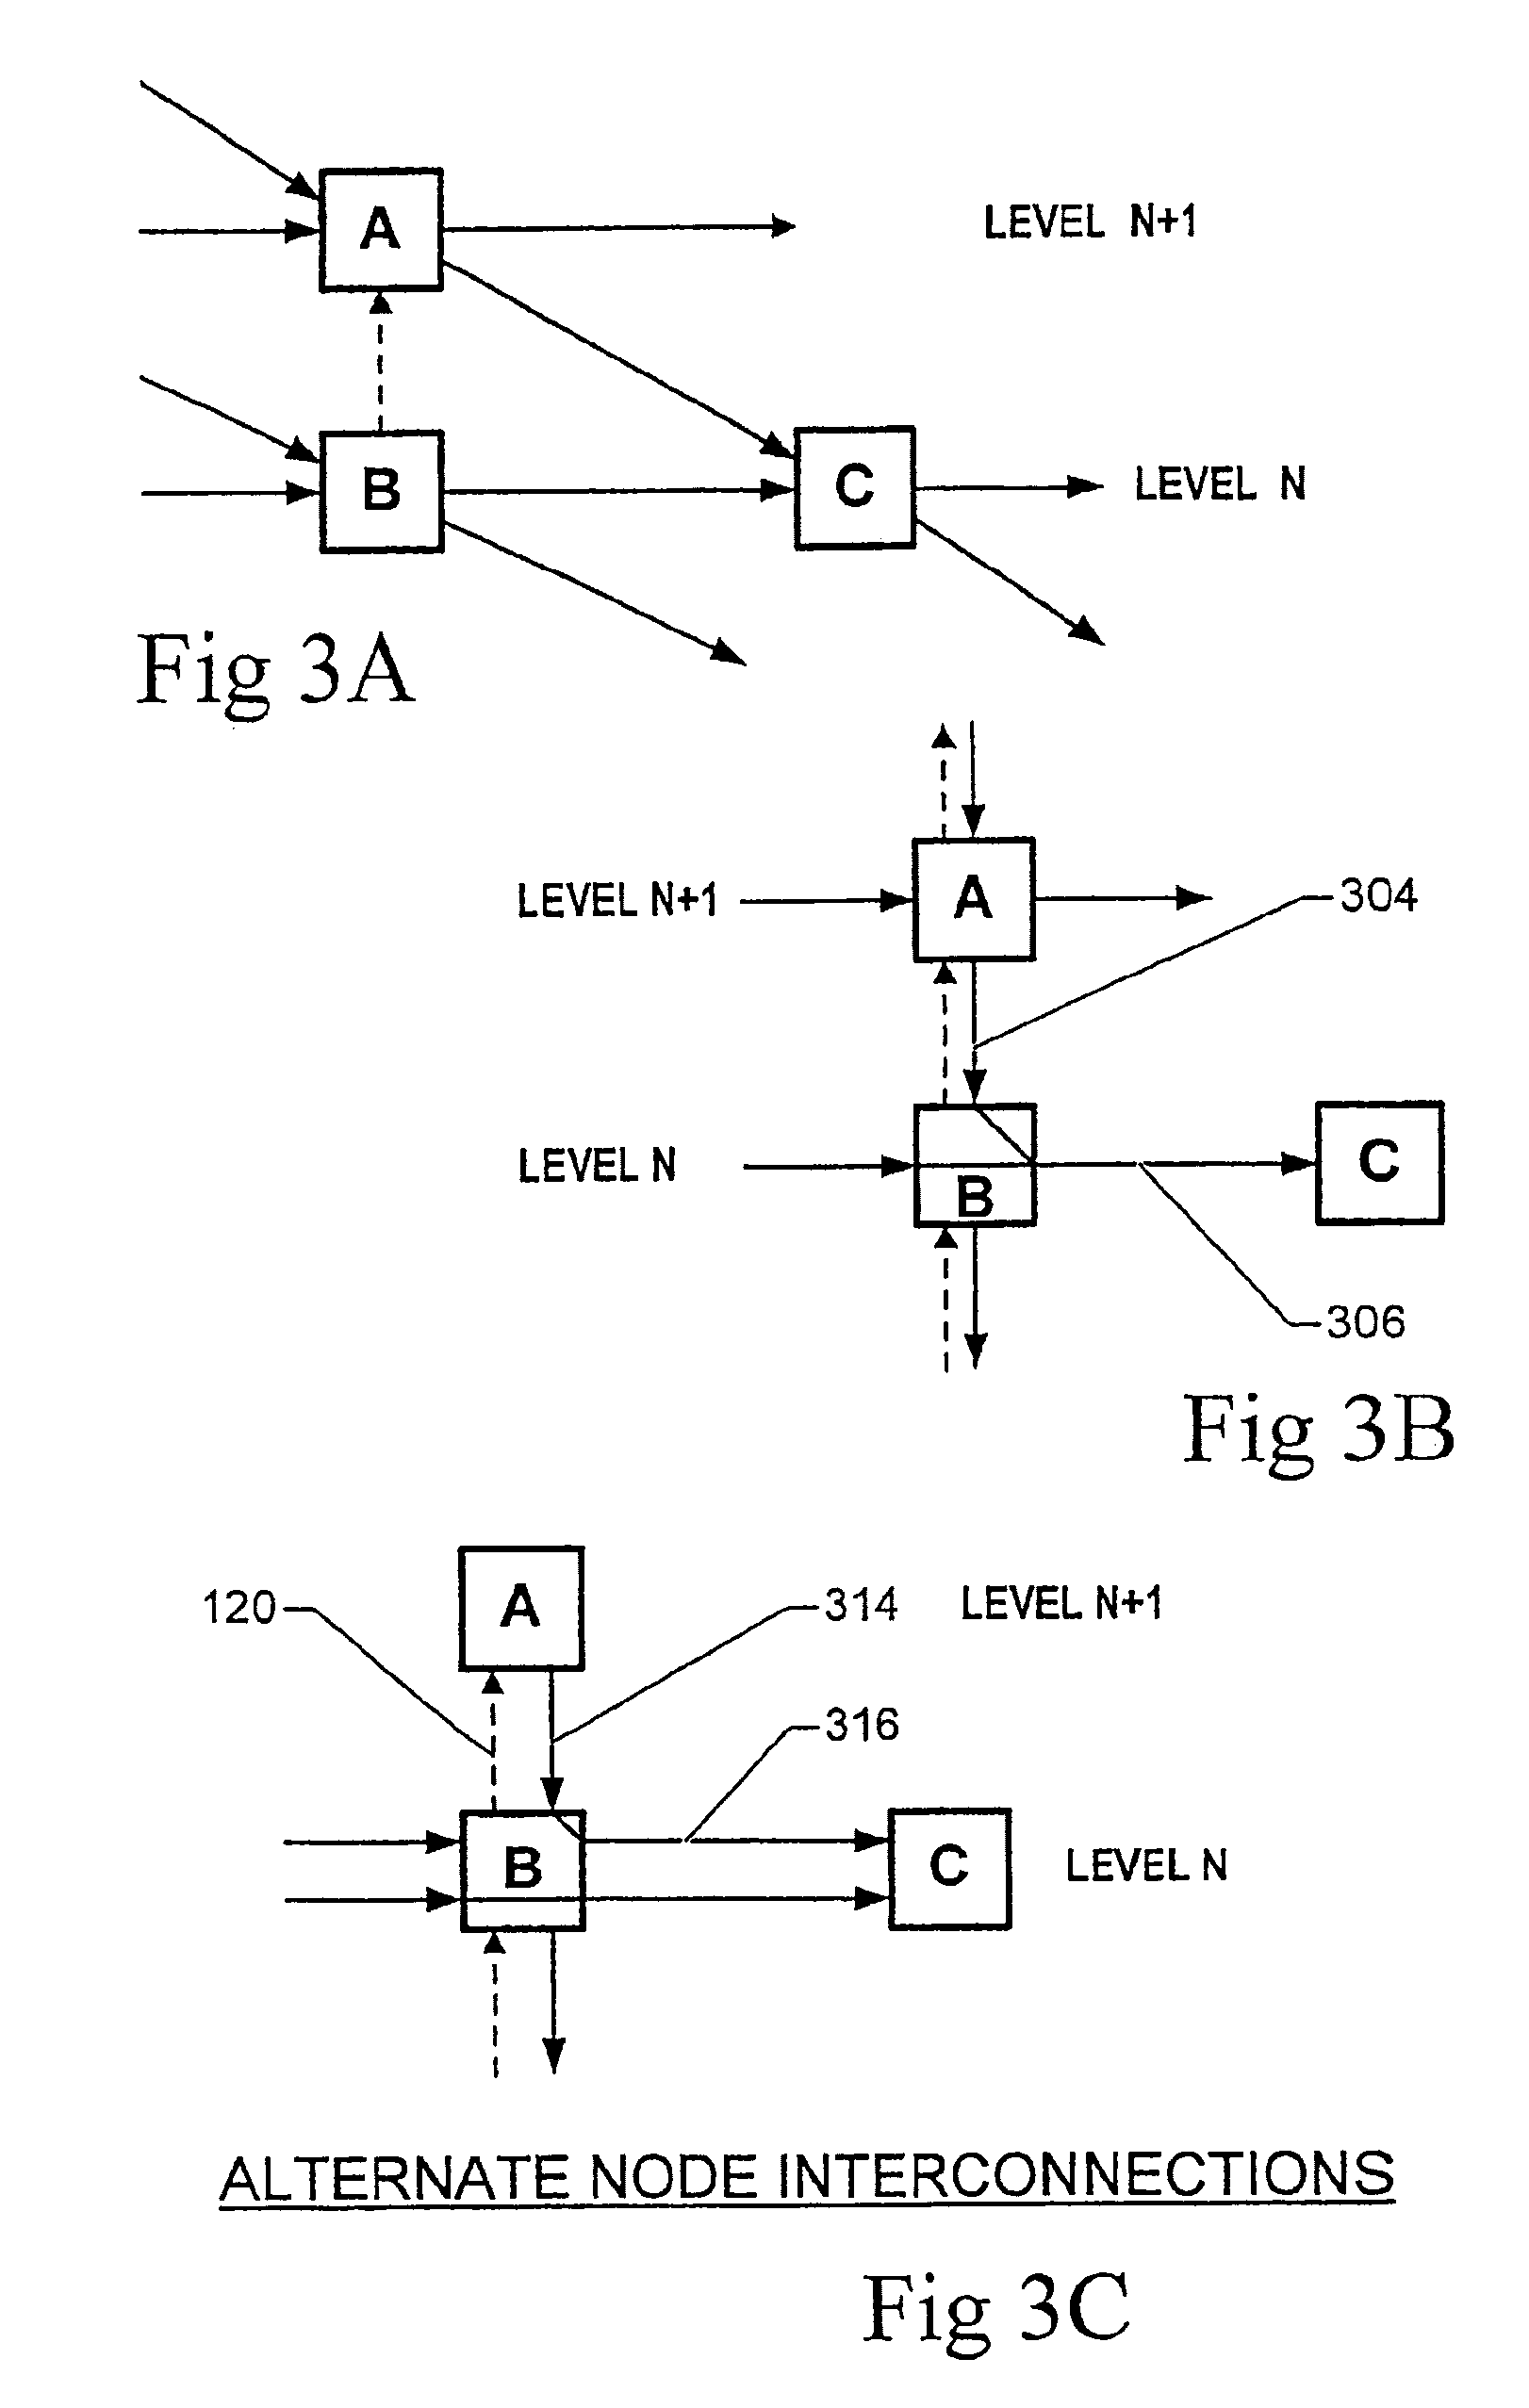 Scalable apparatus and method for increasing throughput in multiple level minimum logic networks using a plurality of control lines